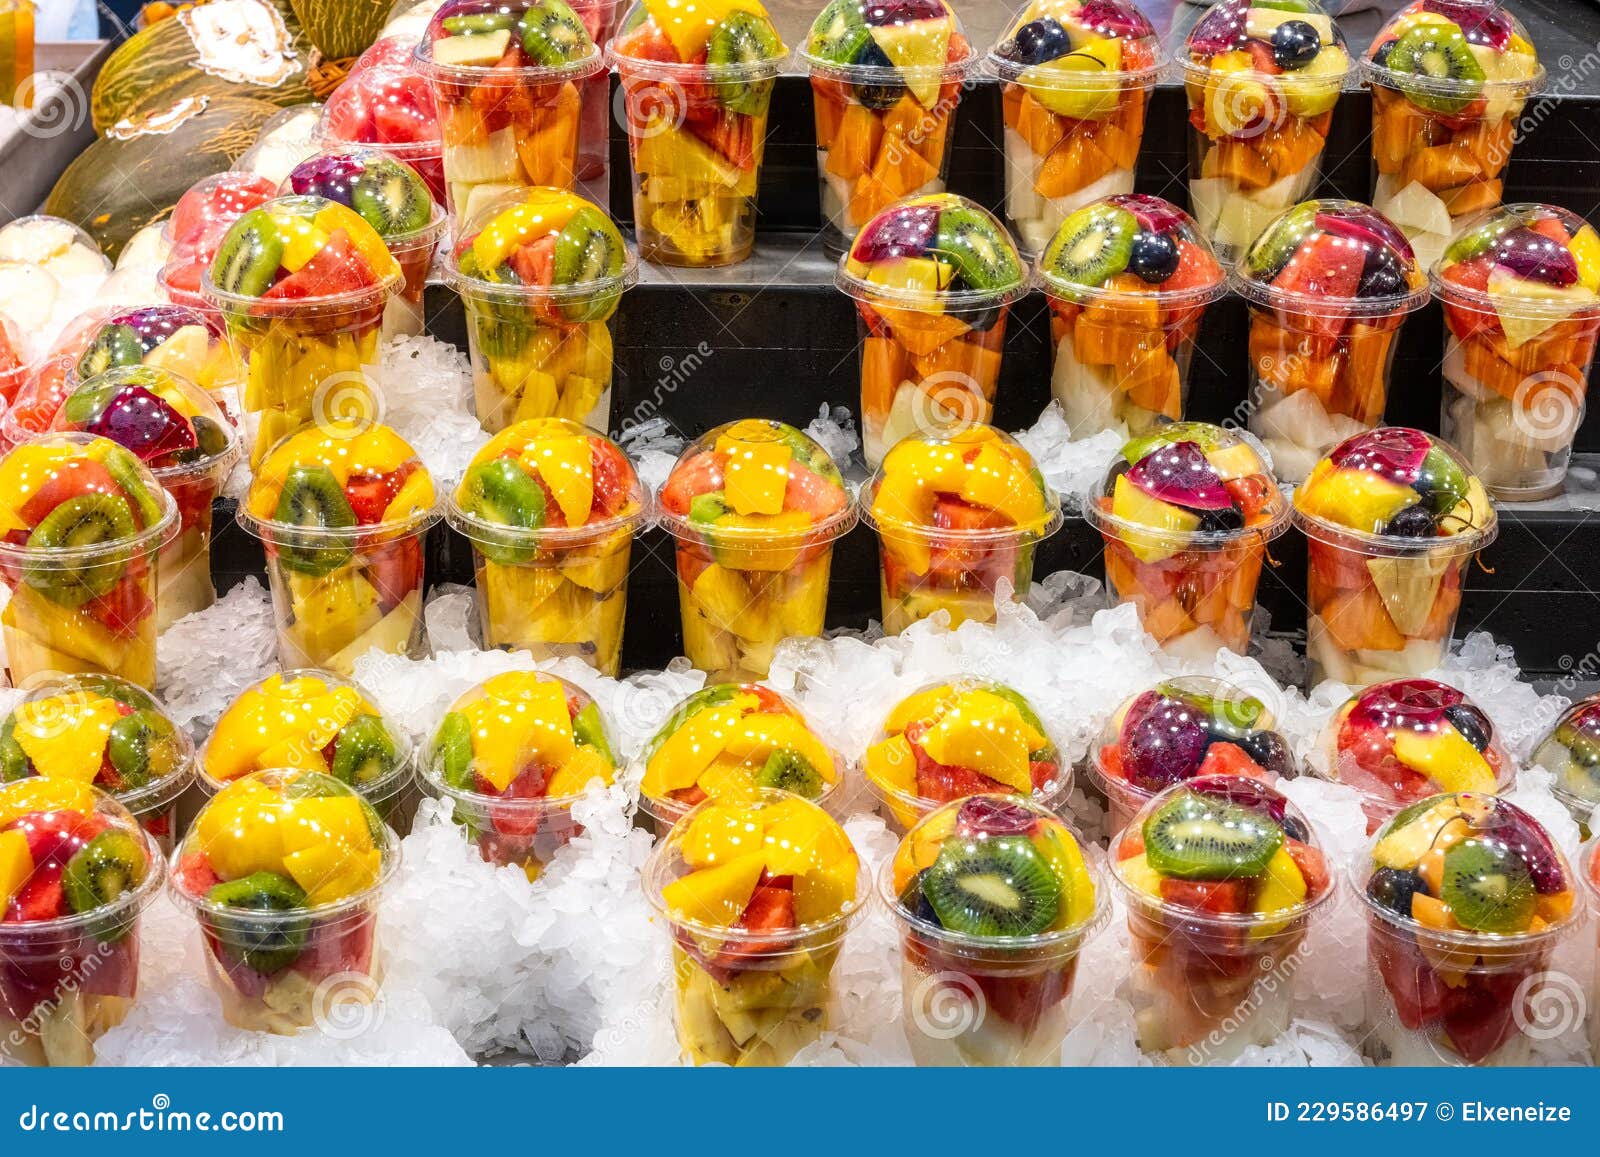 a variety of fruit salads